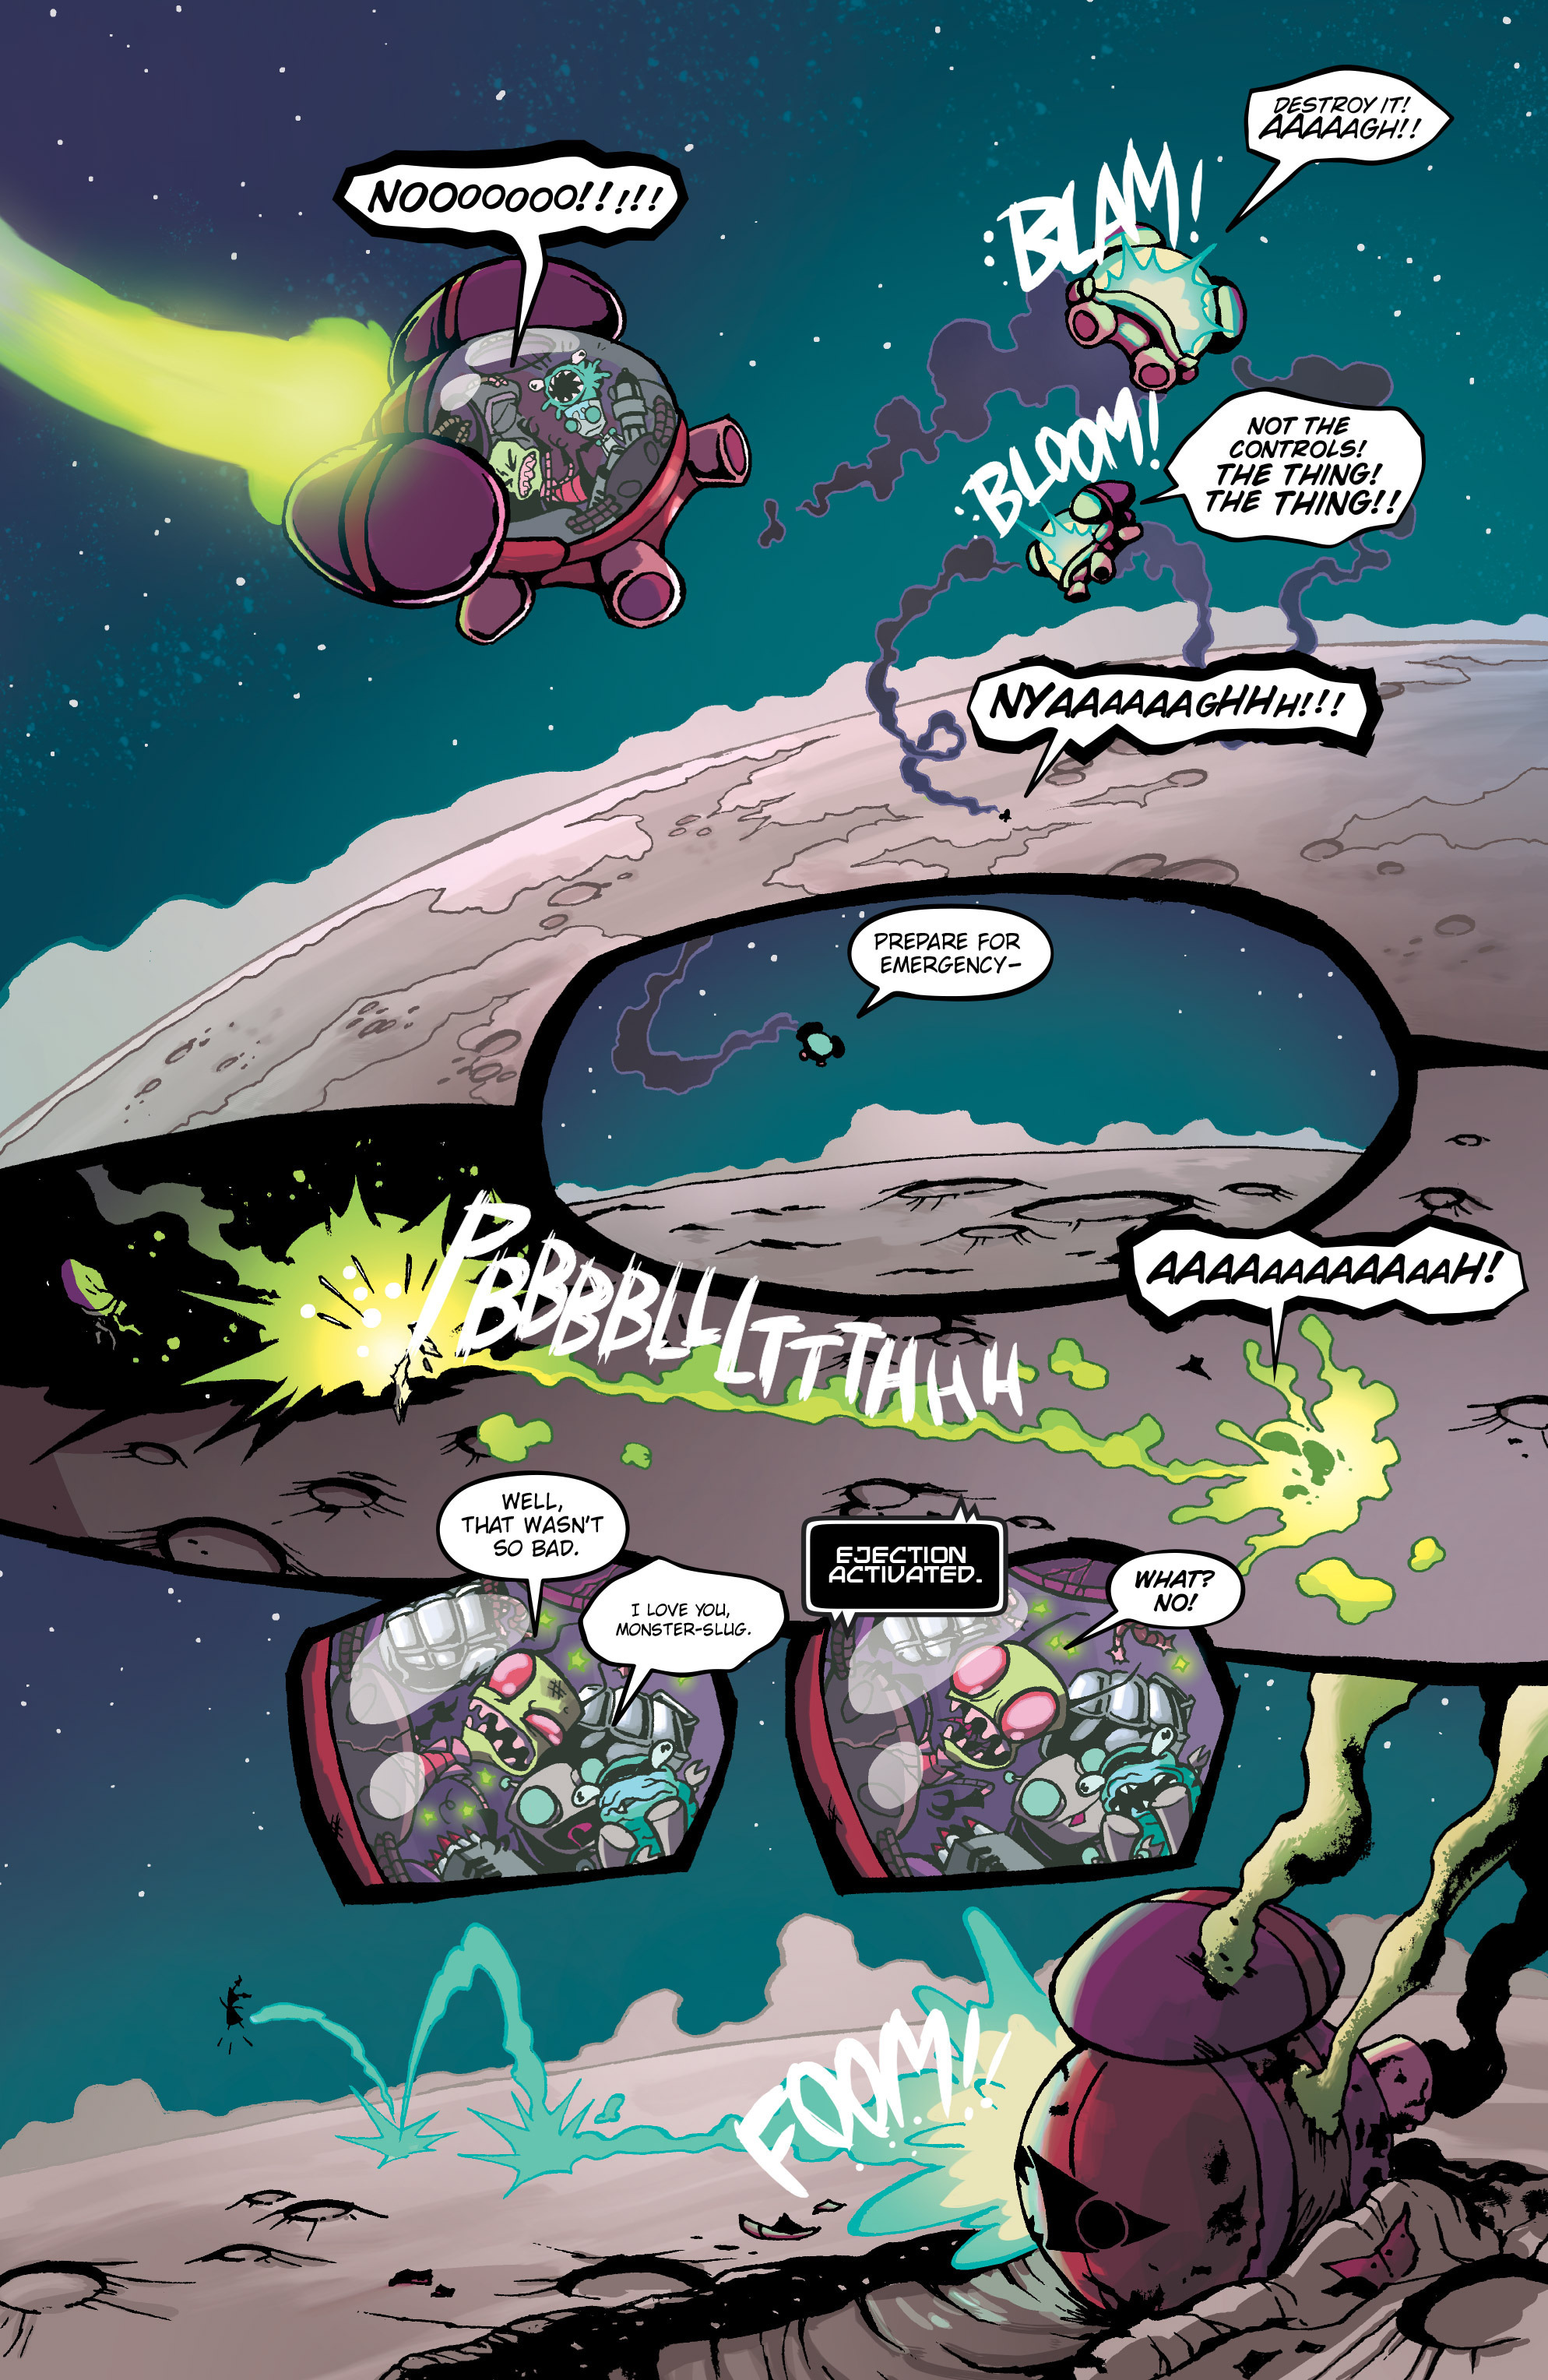 Invader Zim (2015-): Chapter 7 - Page 4